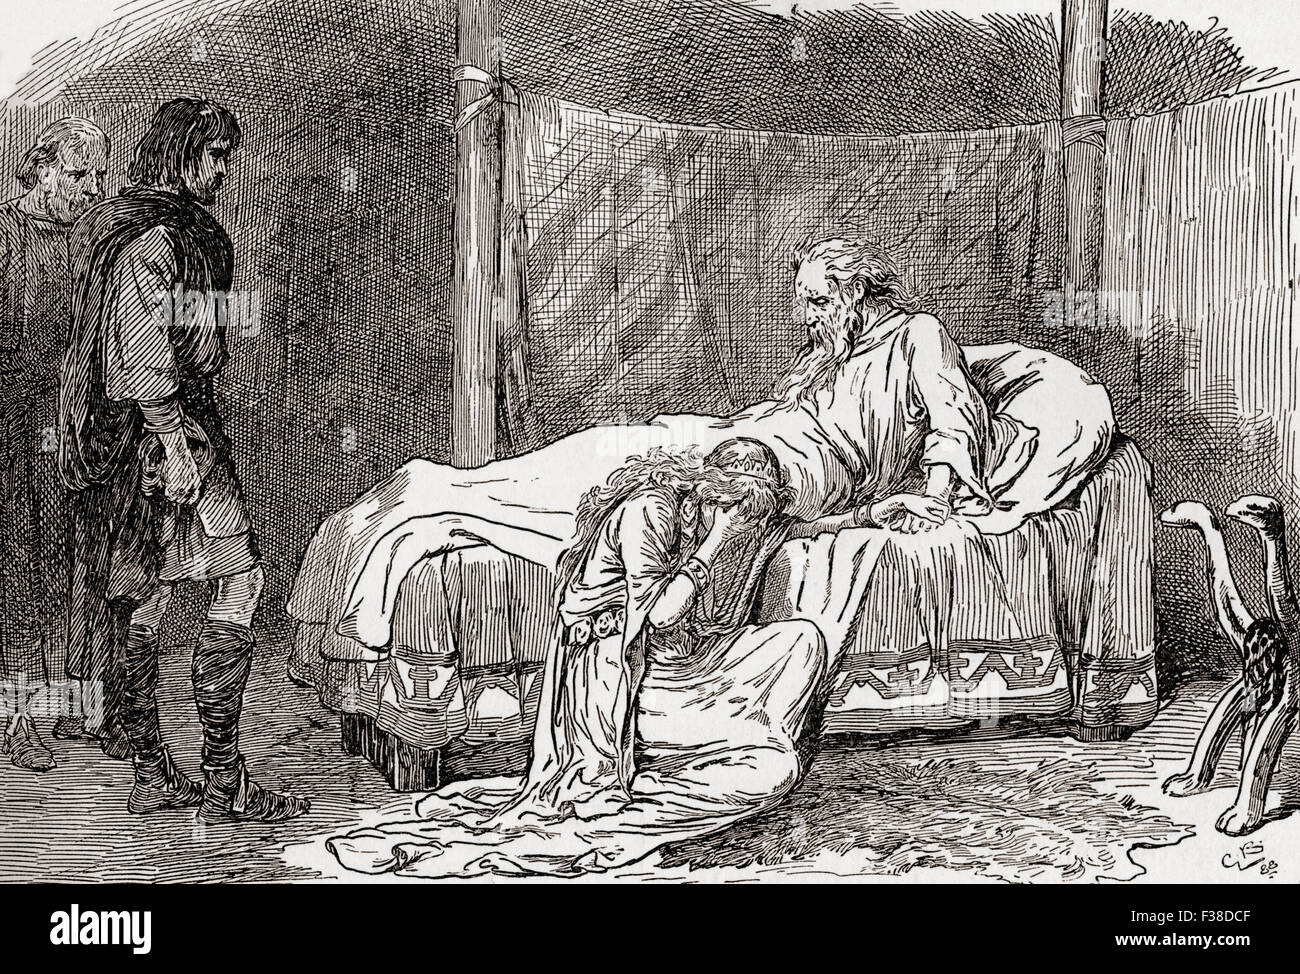 A scene from William Shakespeare's play King Lear. Act IV, scene 7.  Lear:  'I pray, weep not.  If you have poison for me, I will drink it.  I know you do not love me, for your sisters have, as I do remember, done me wrong.  You have some cause, they do not.'  Illustration by Gordon Browne. Stock Photo